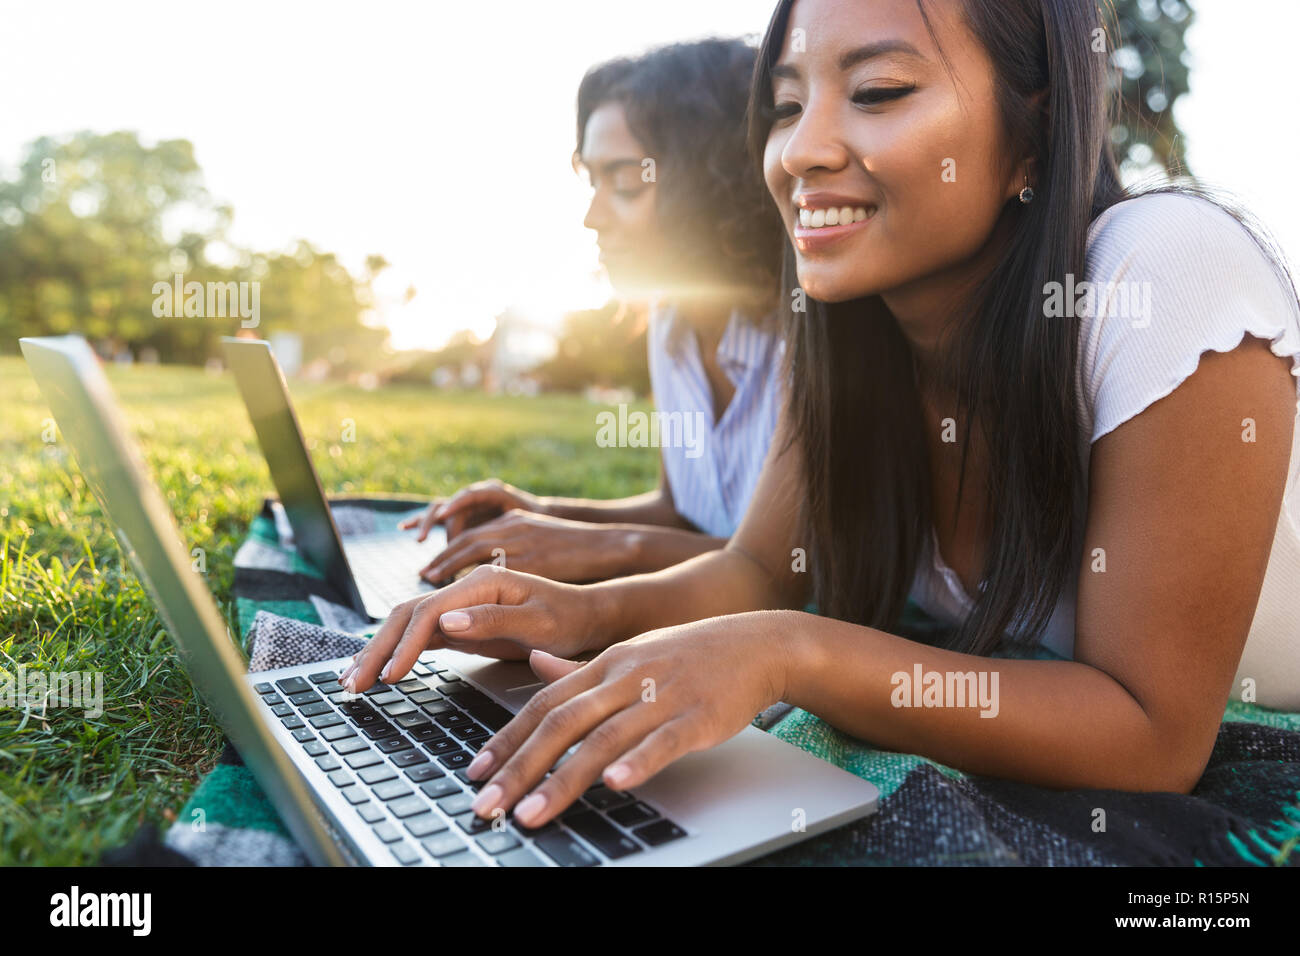 Image of happy smiling young friends girls outdoors in park using laptop computers. Stock Photo